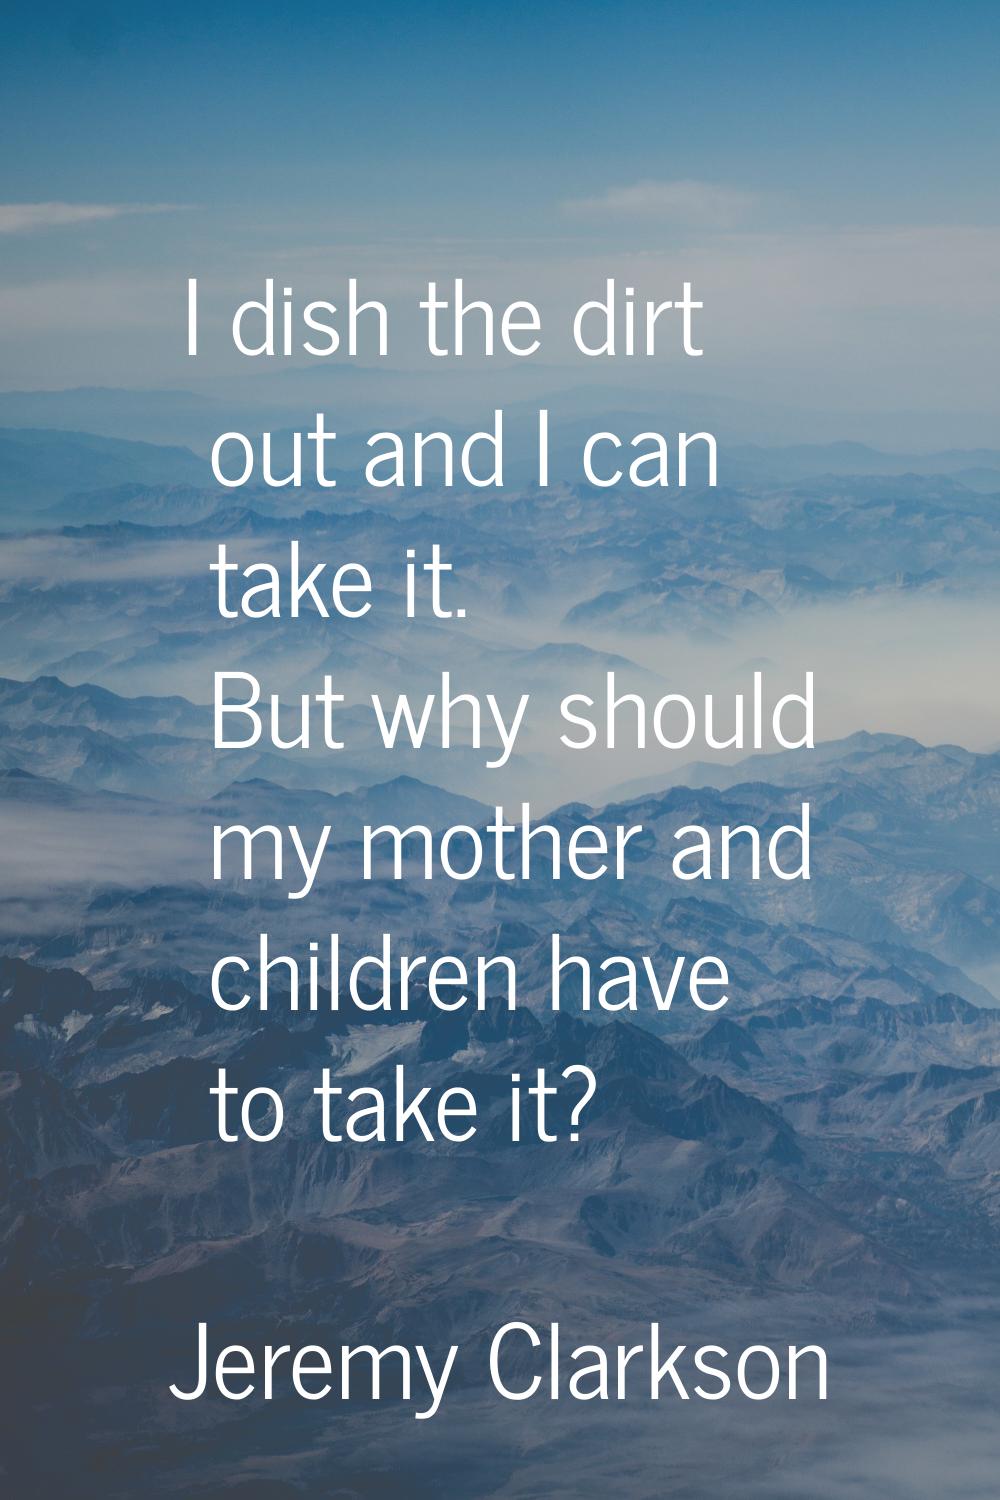 I dish the dirt out and I can take it. But why should my mother and children have to take it?